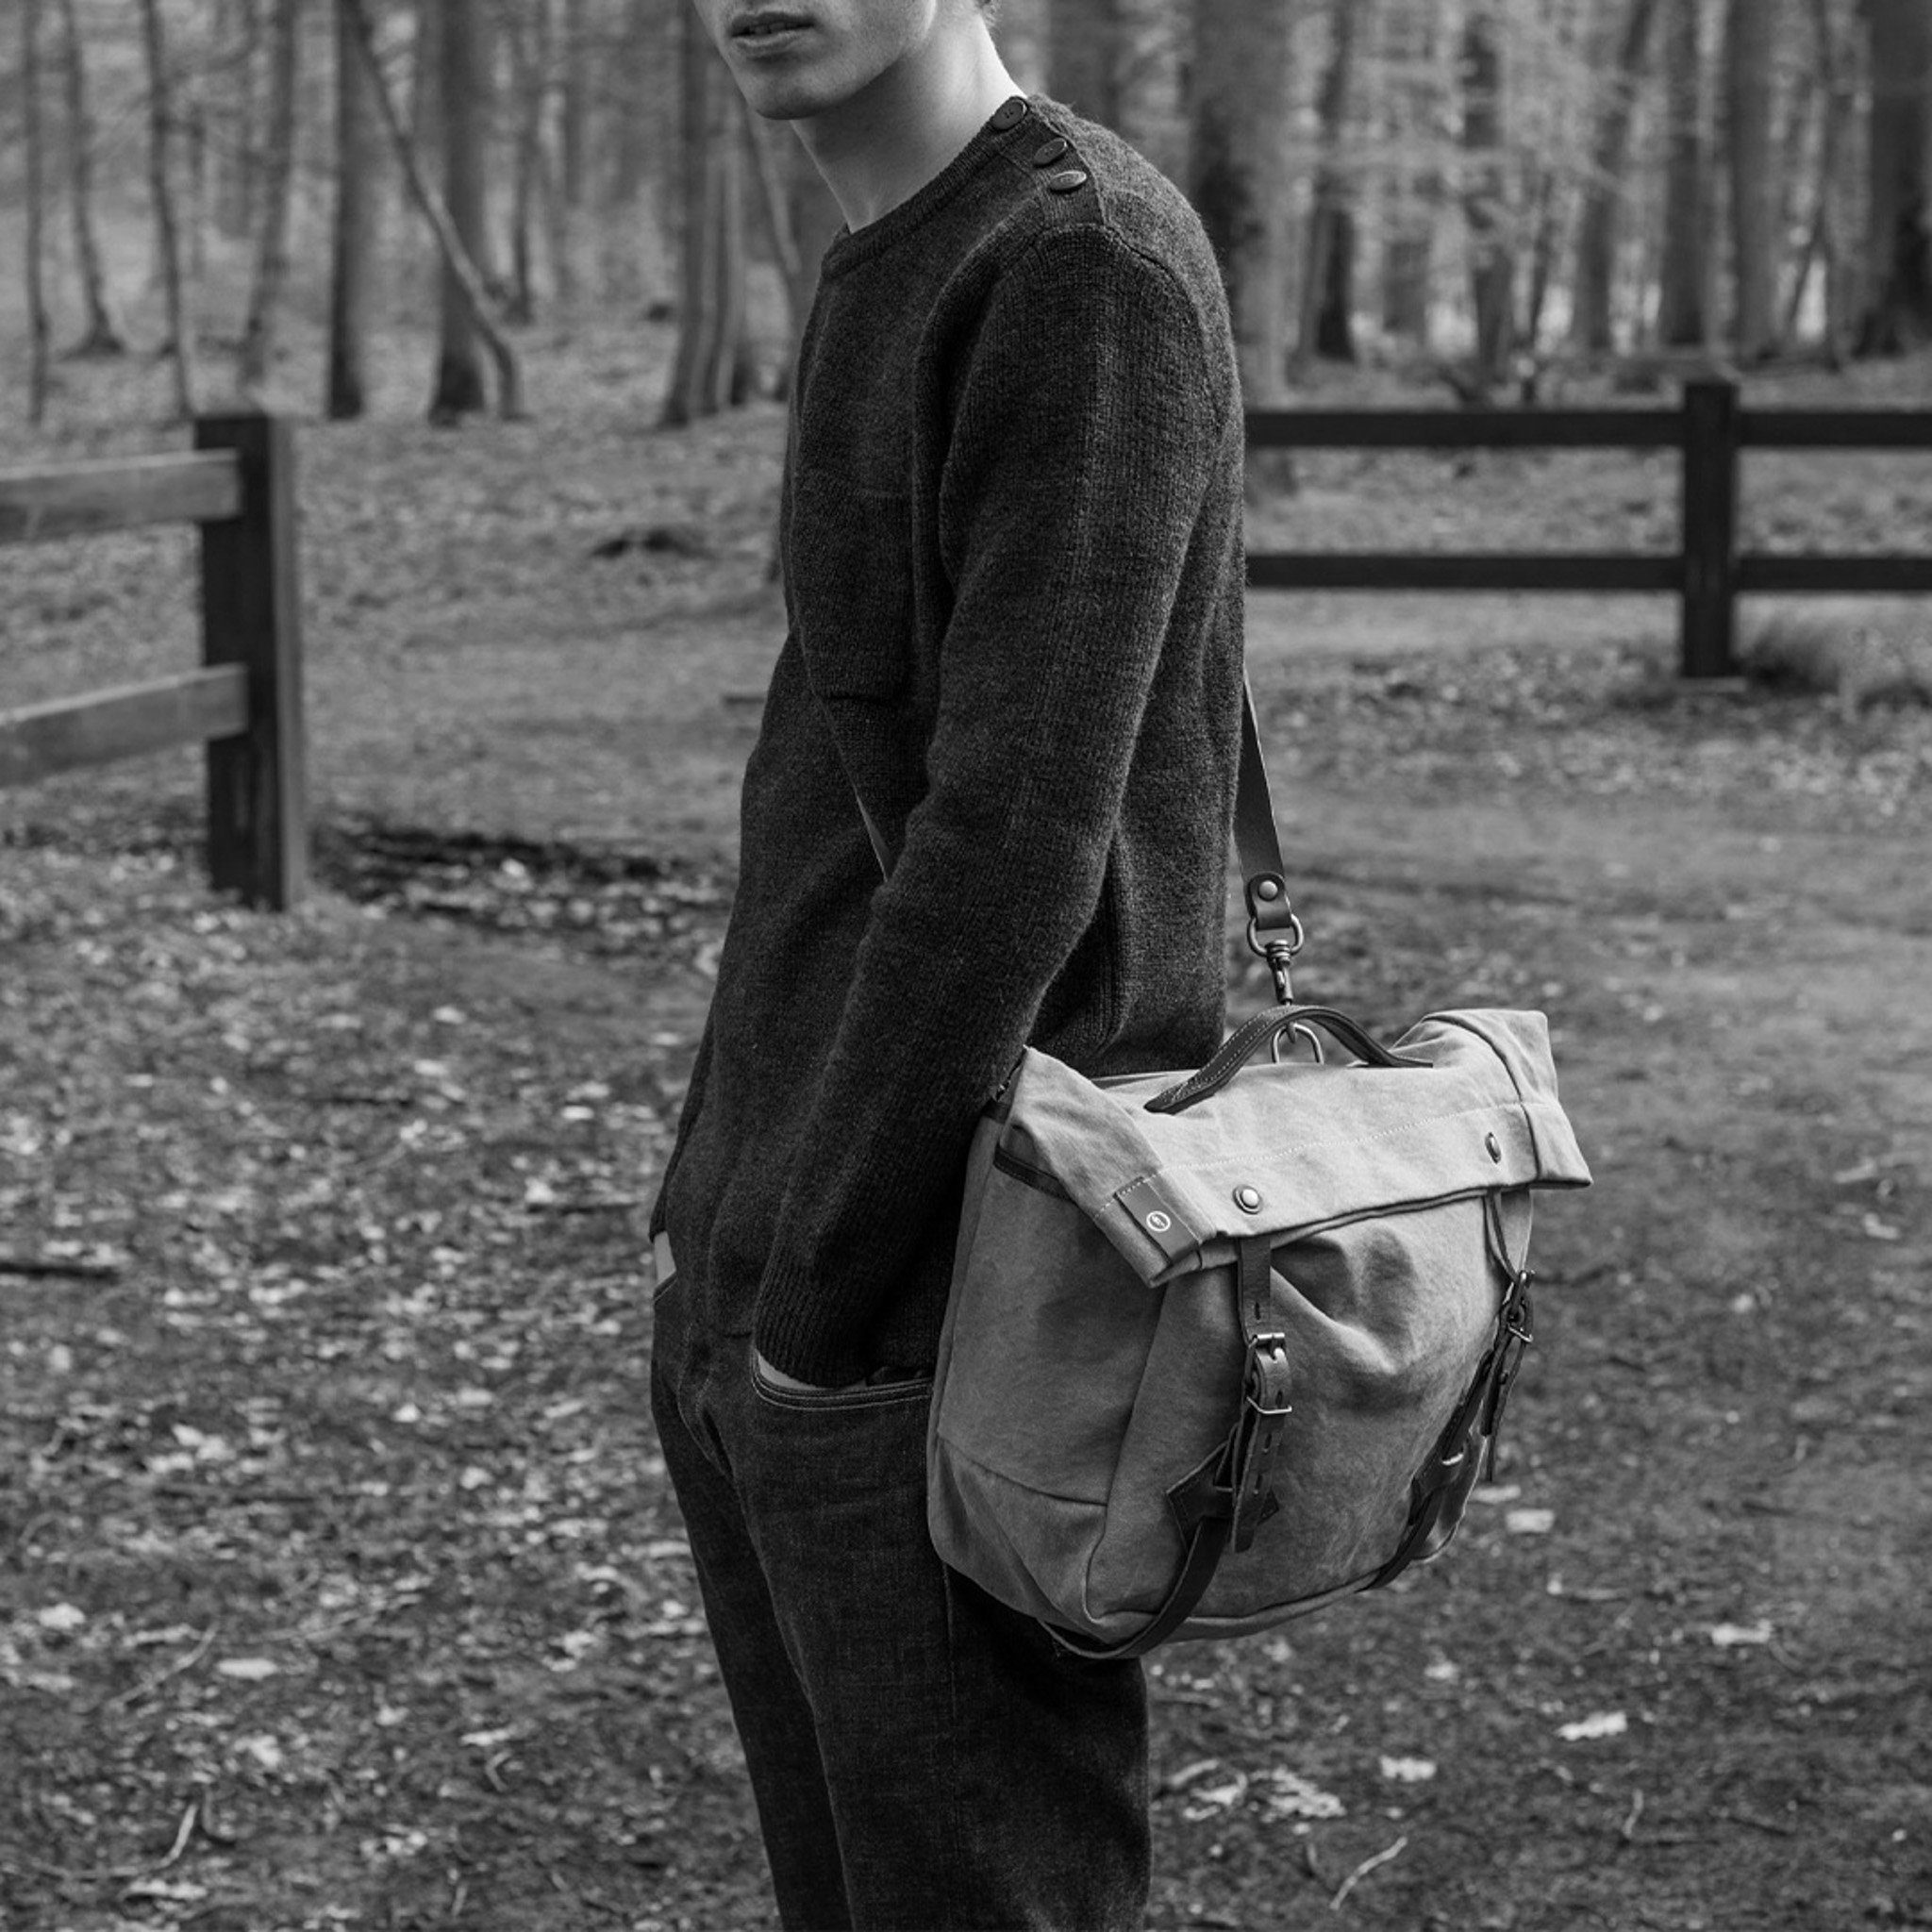 Black and white photo of a man in the forest, carrying a musette bag on his shoulder.